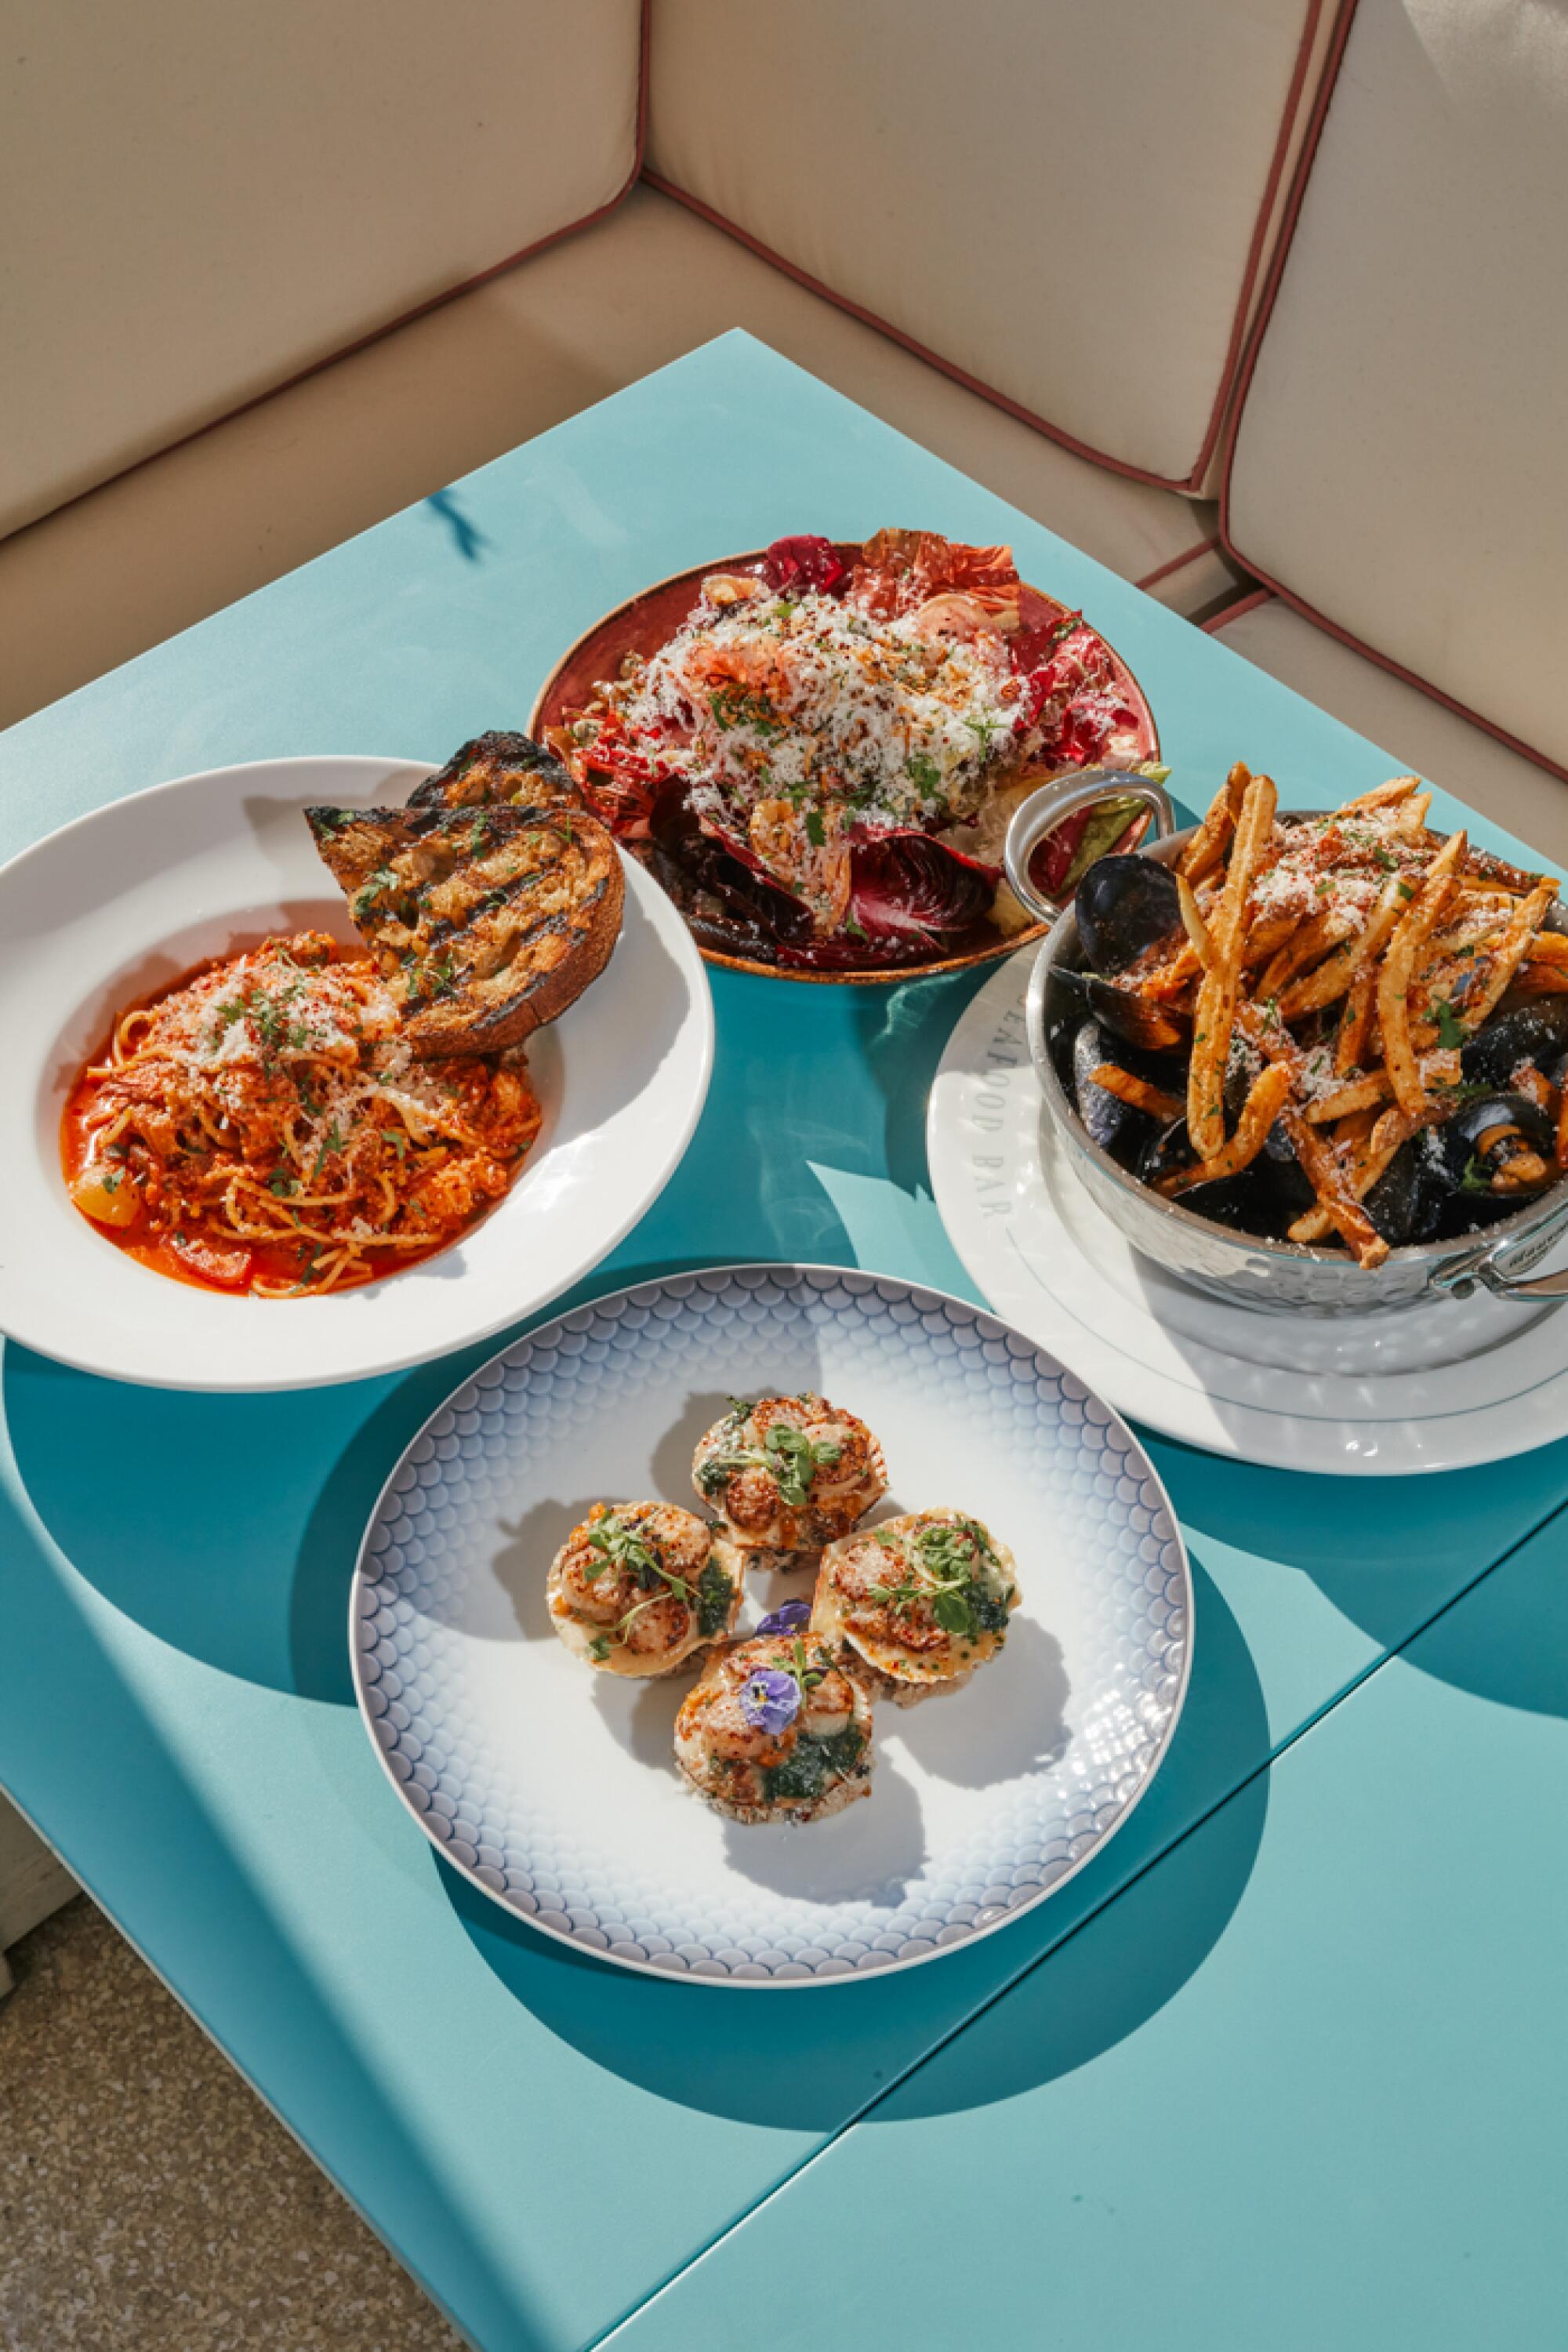 Four plates of food on a turquoise tabletop outside on a restaurant patio.